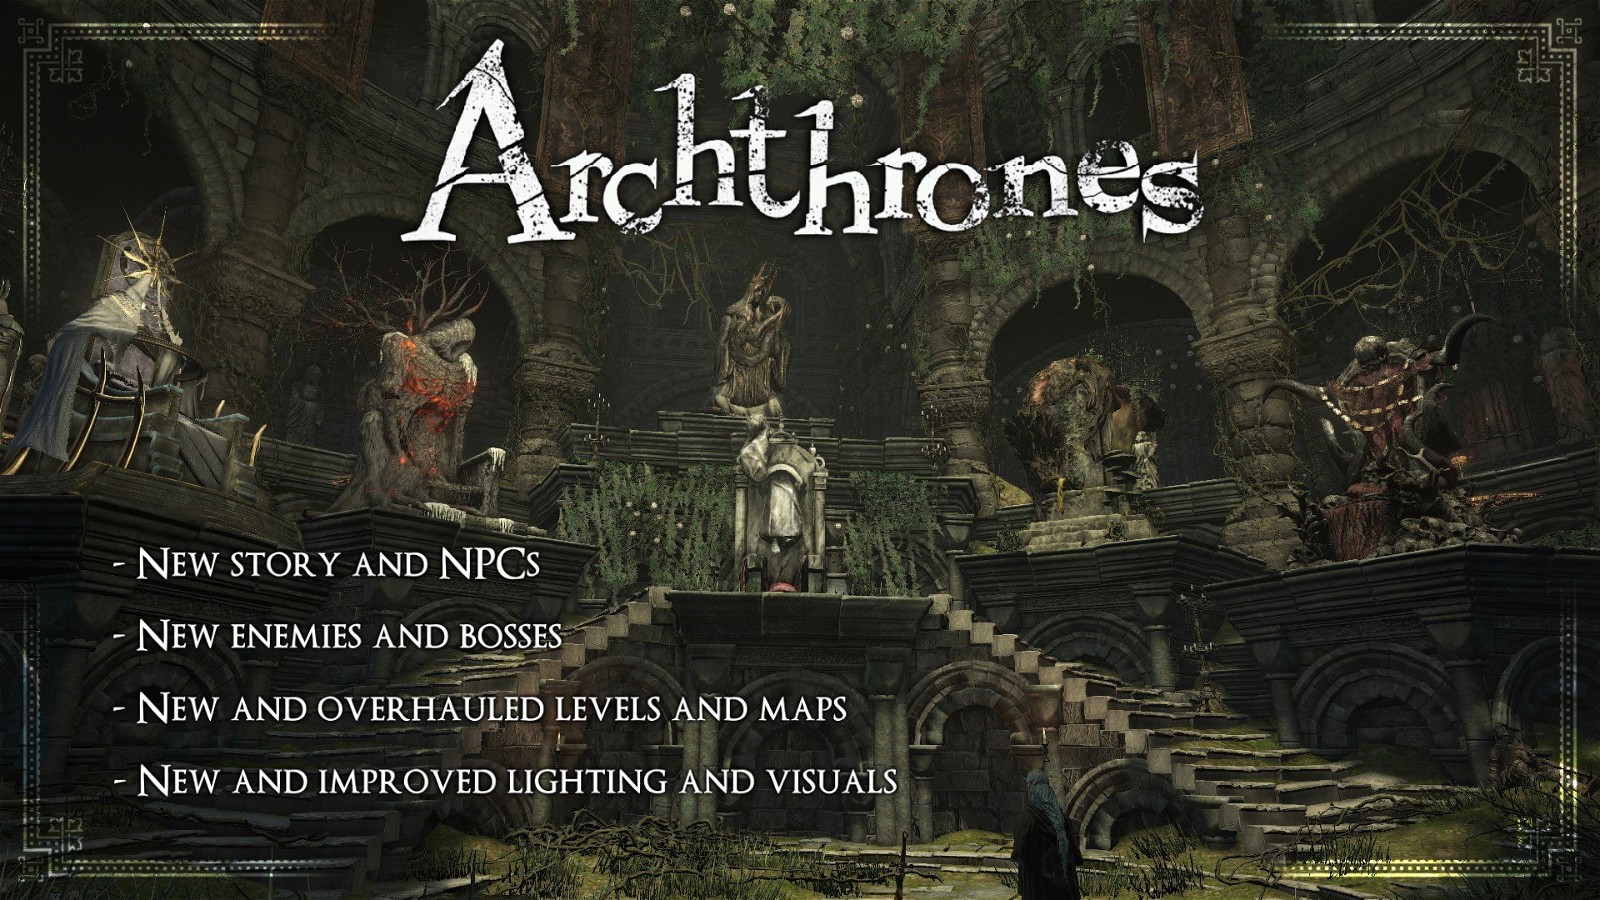 Everything that the Archthrones mod offers. Image credit: Archthrones via Twitter